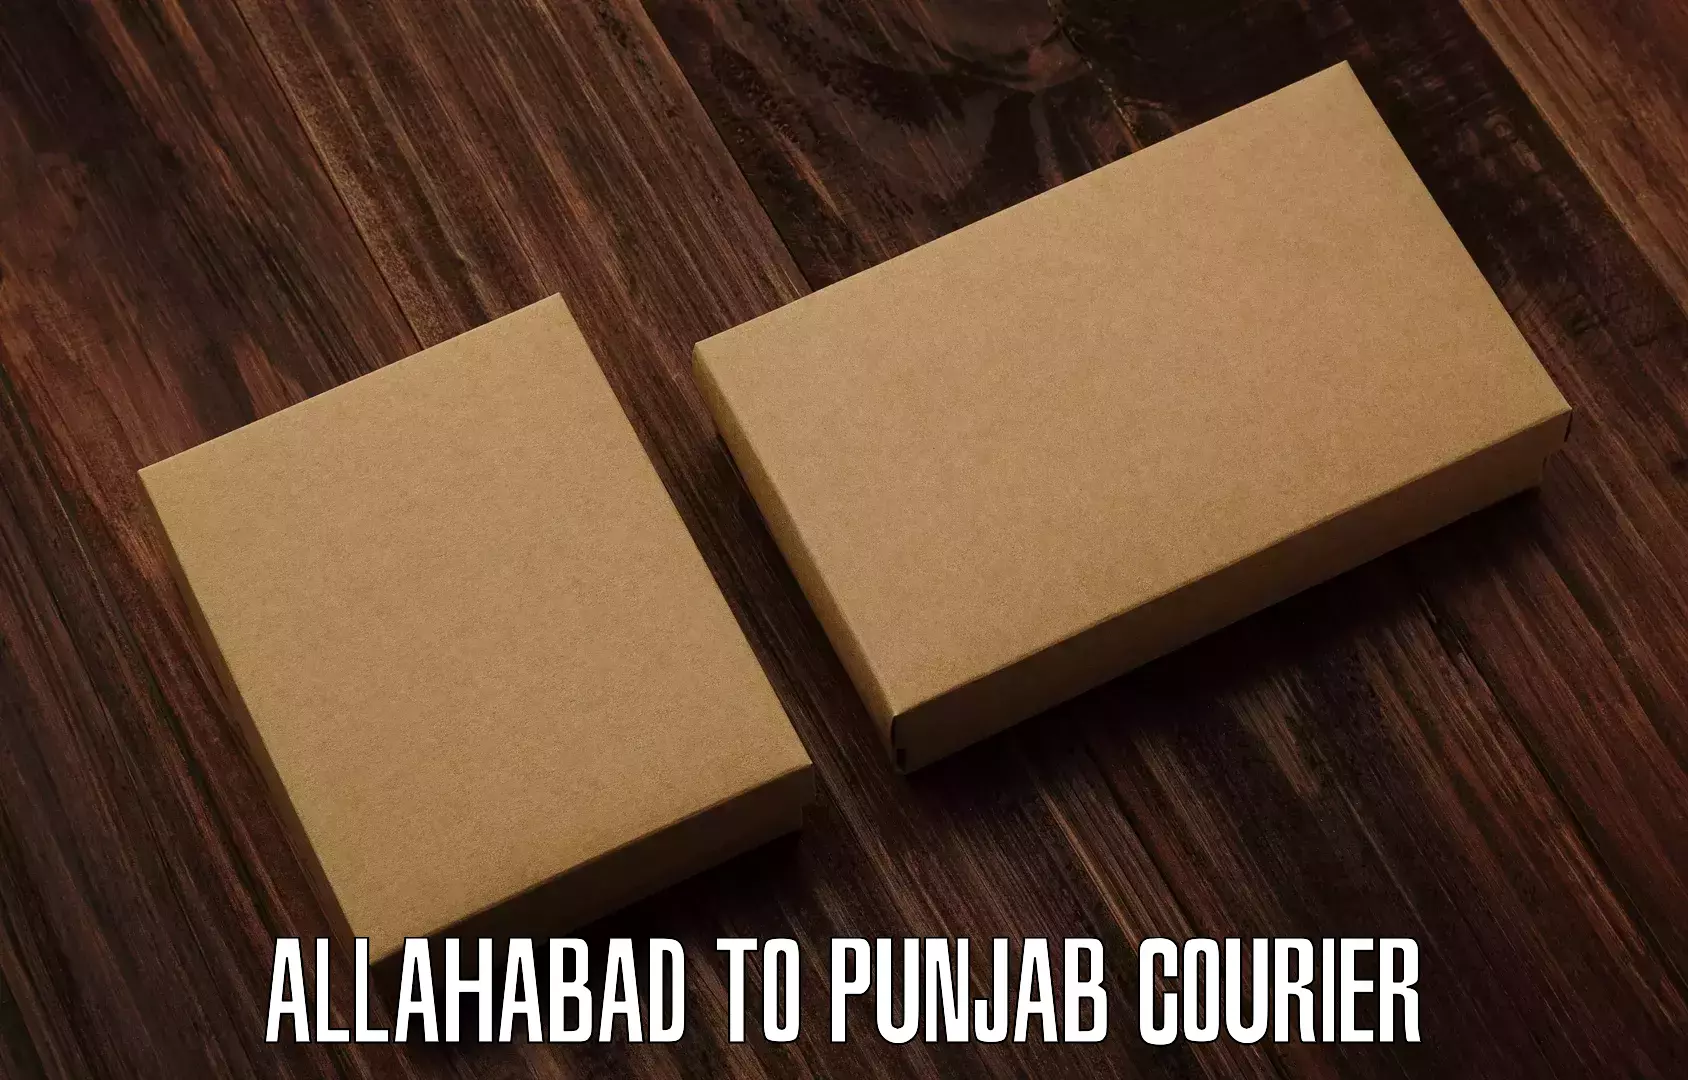 Business delivery service Allahabad to Phagwara